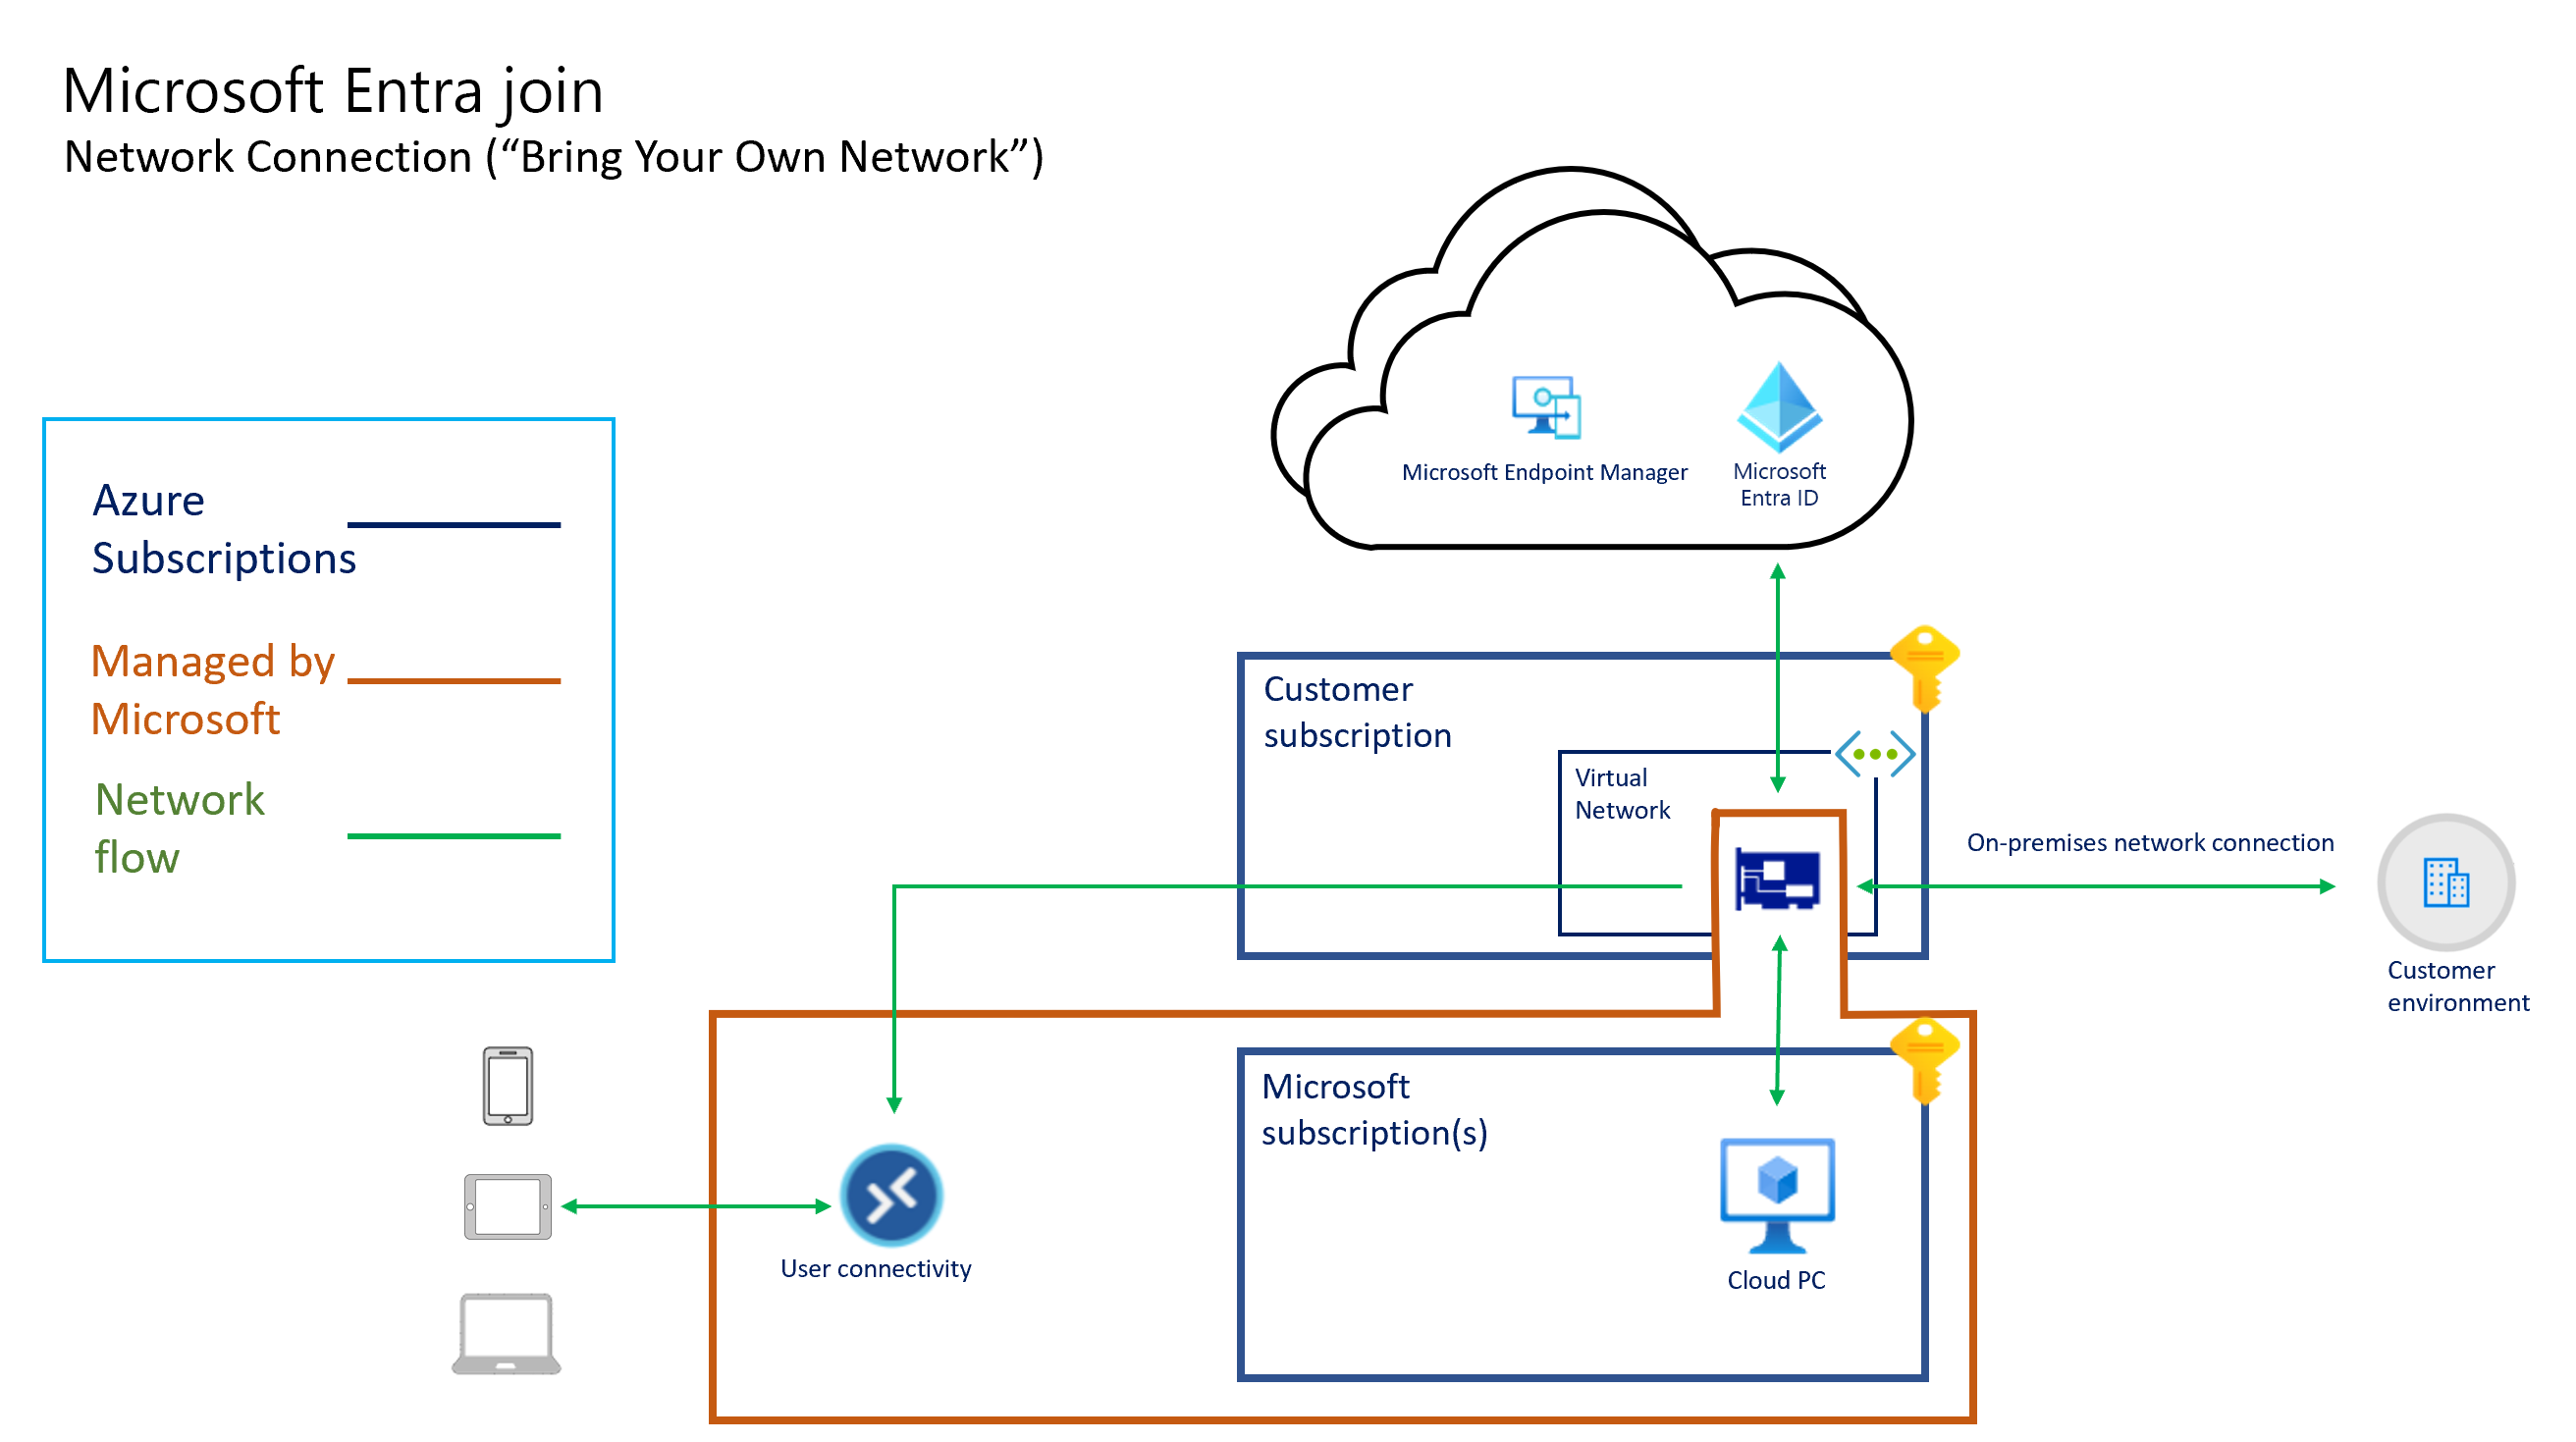 Screenshot of Microsoft Entra join architecture with BYO network